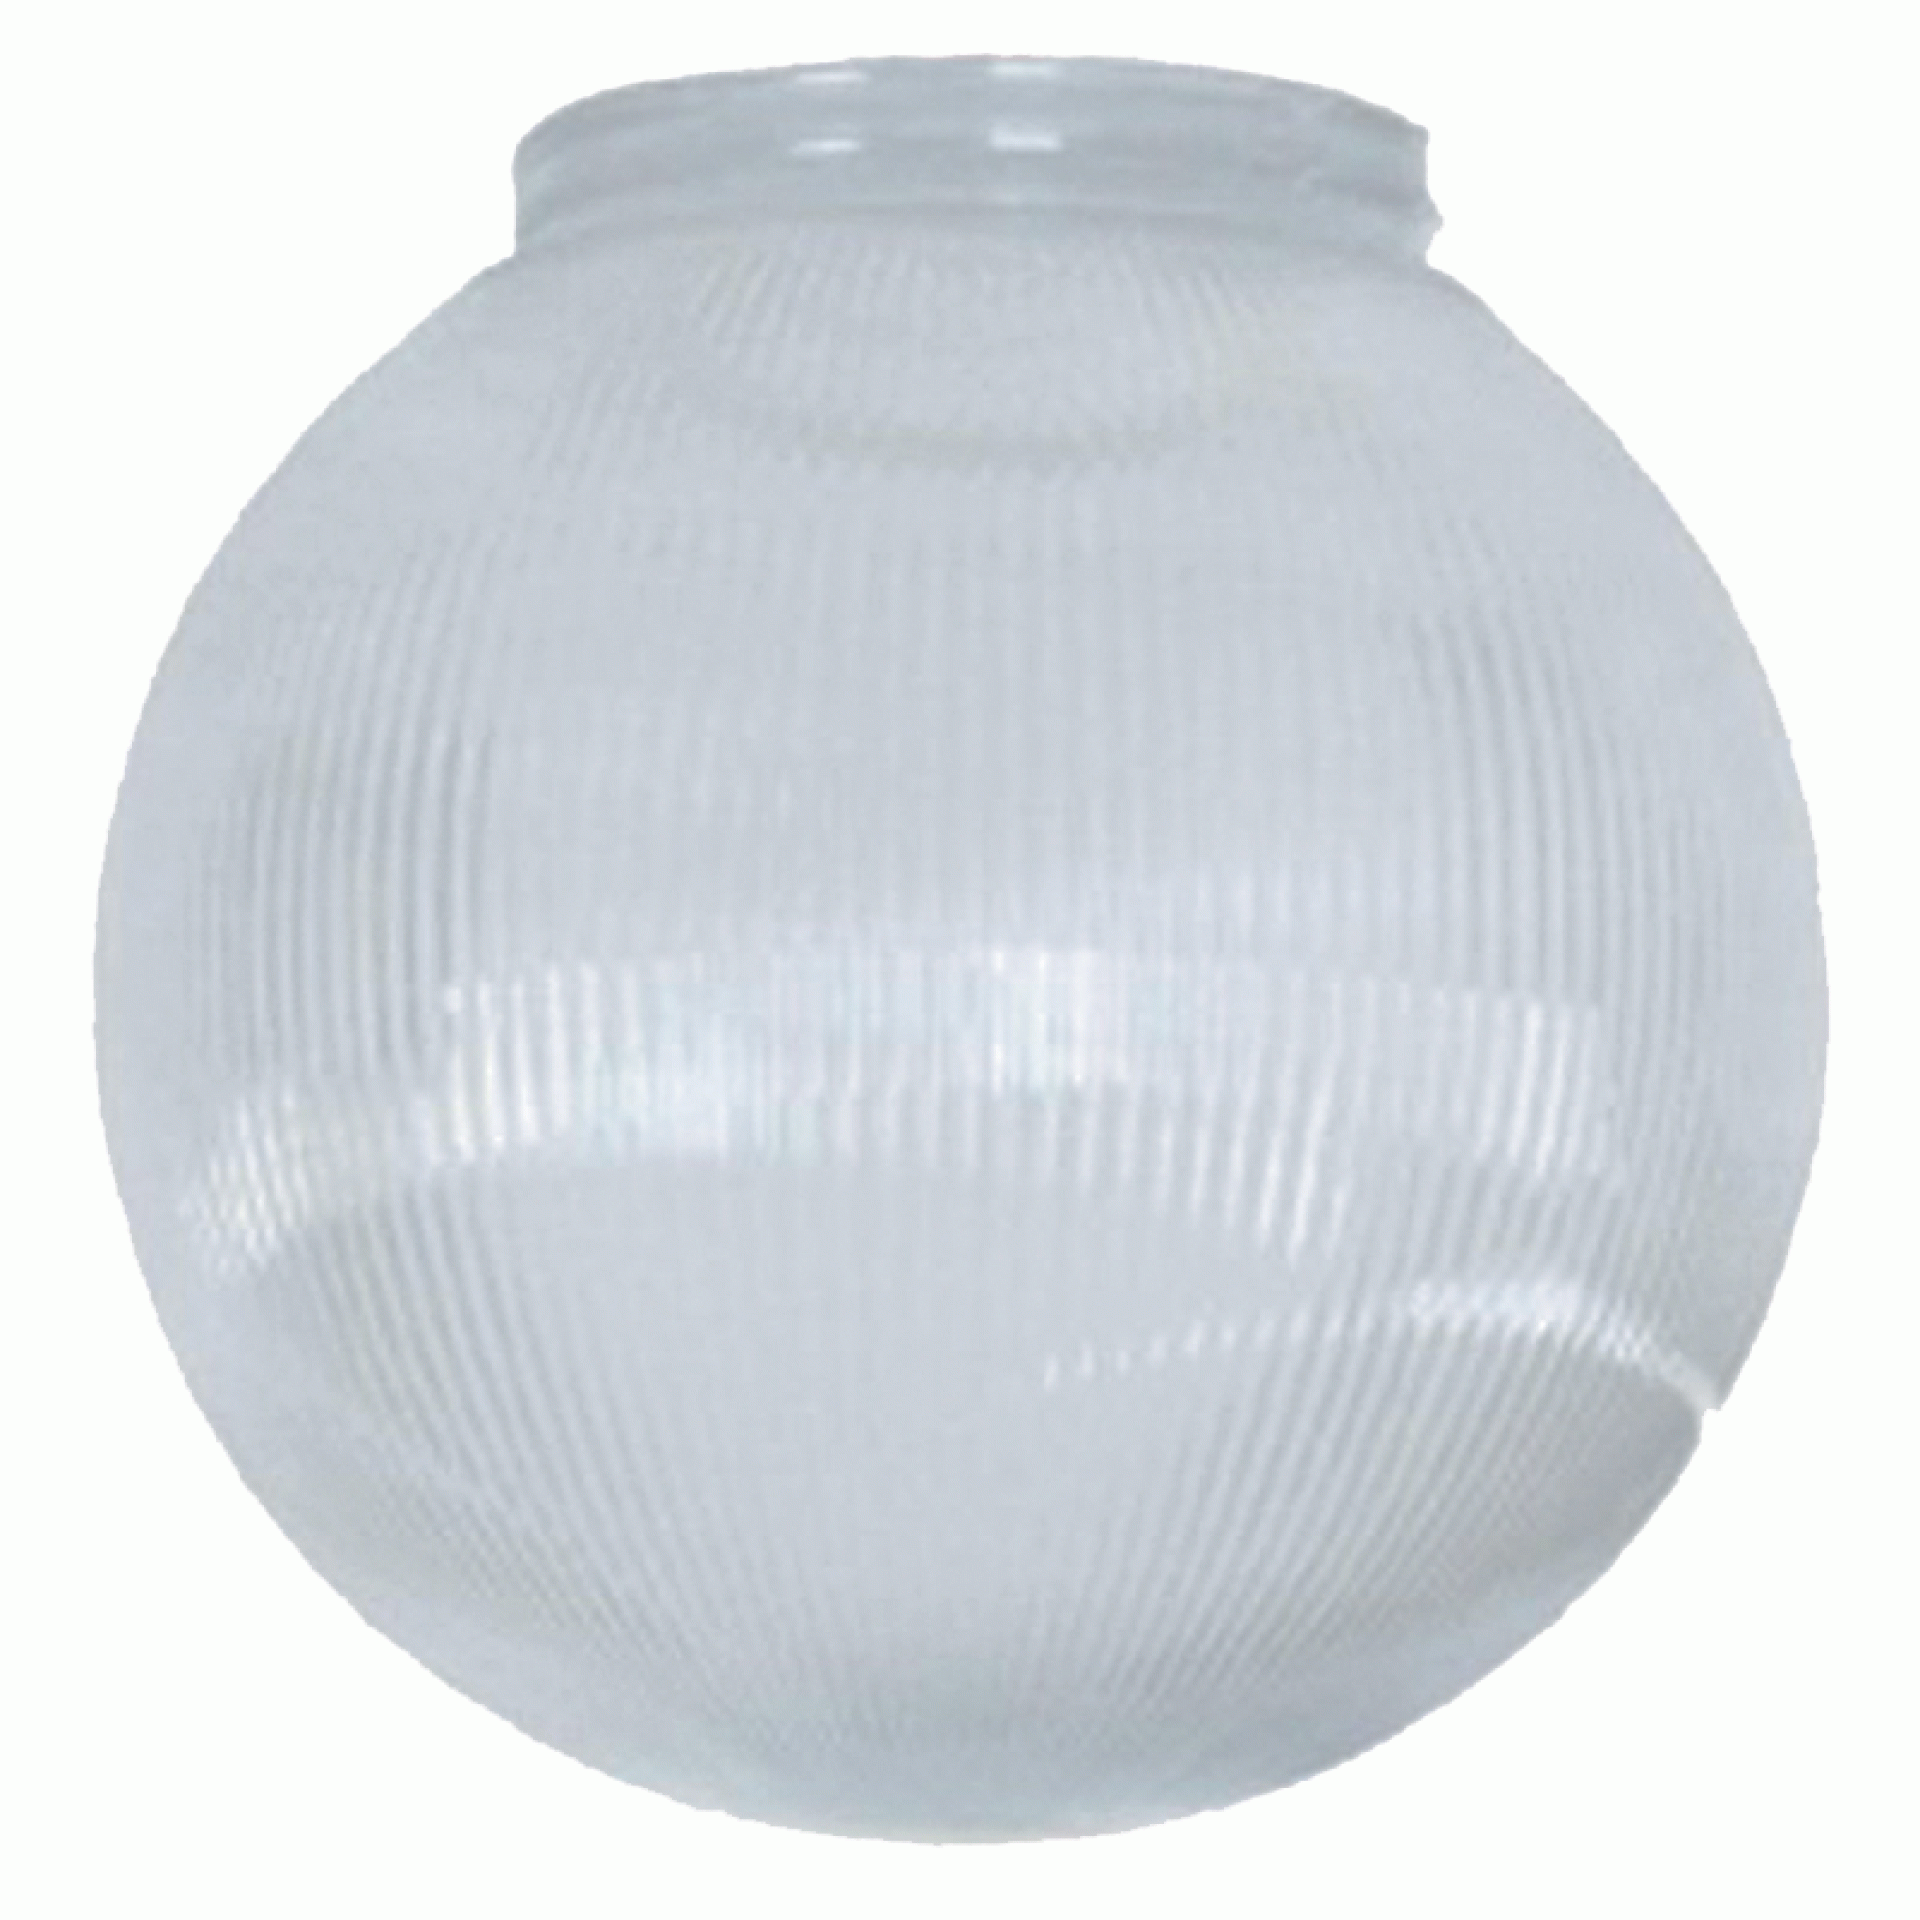 POLYMER PRODUCT LLC. | 3201-51630 | REPLACEMENT GLOBE - WHITE